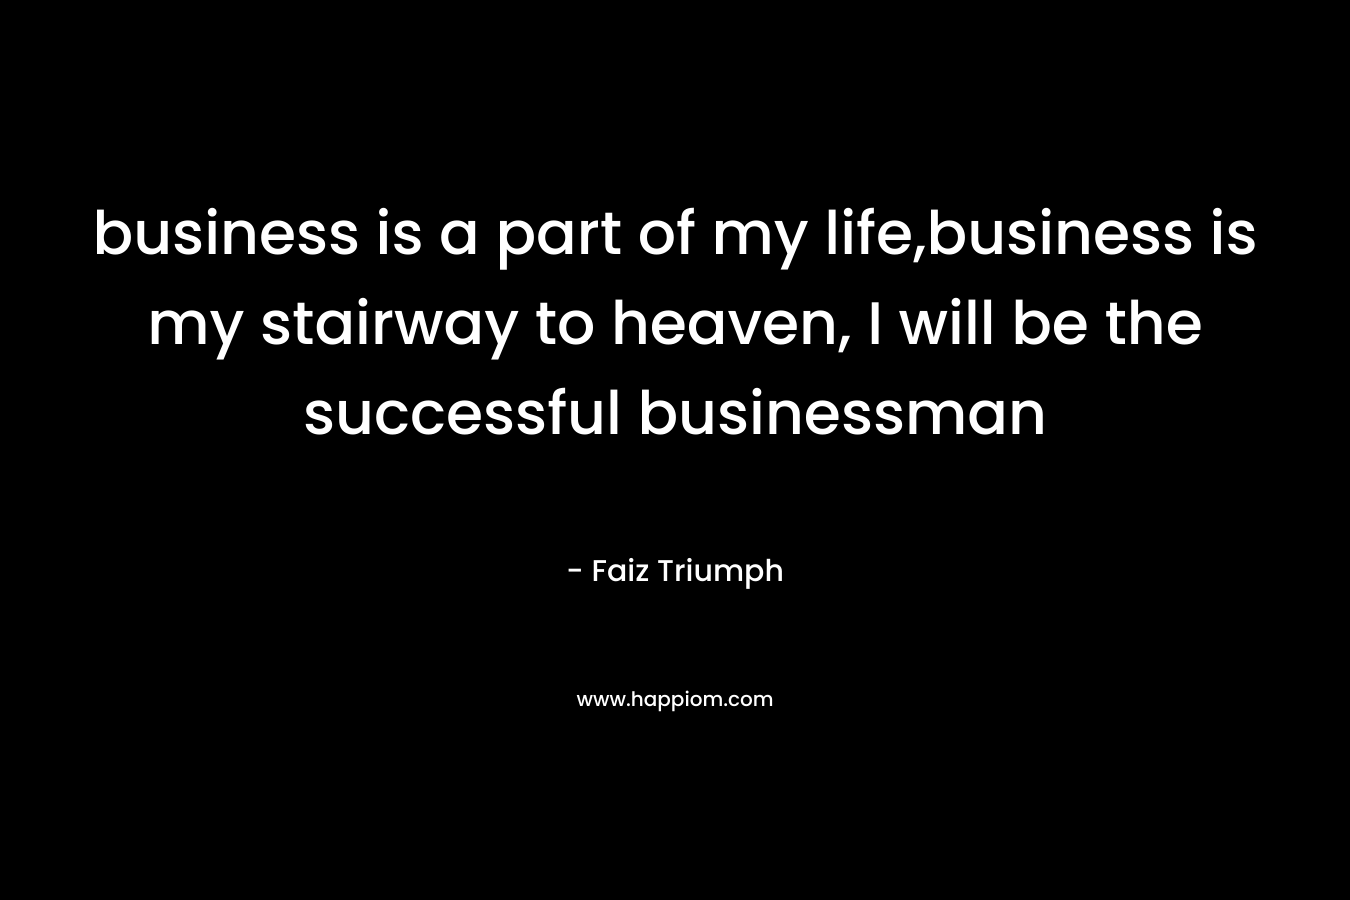 business is a part of my life,business is my stairway to heaven, I will be the successful businessman